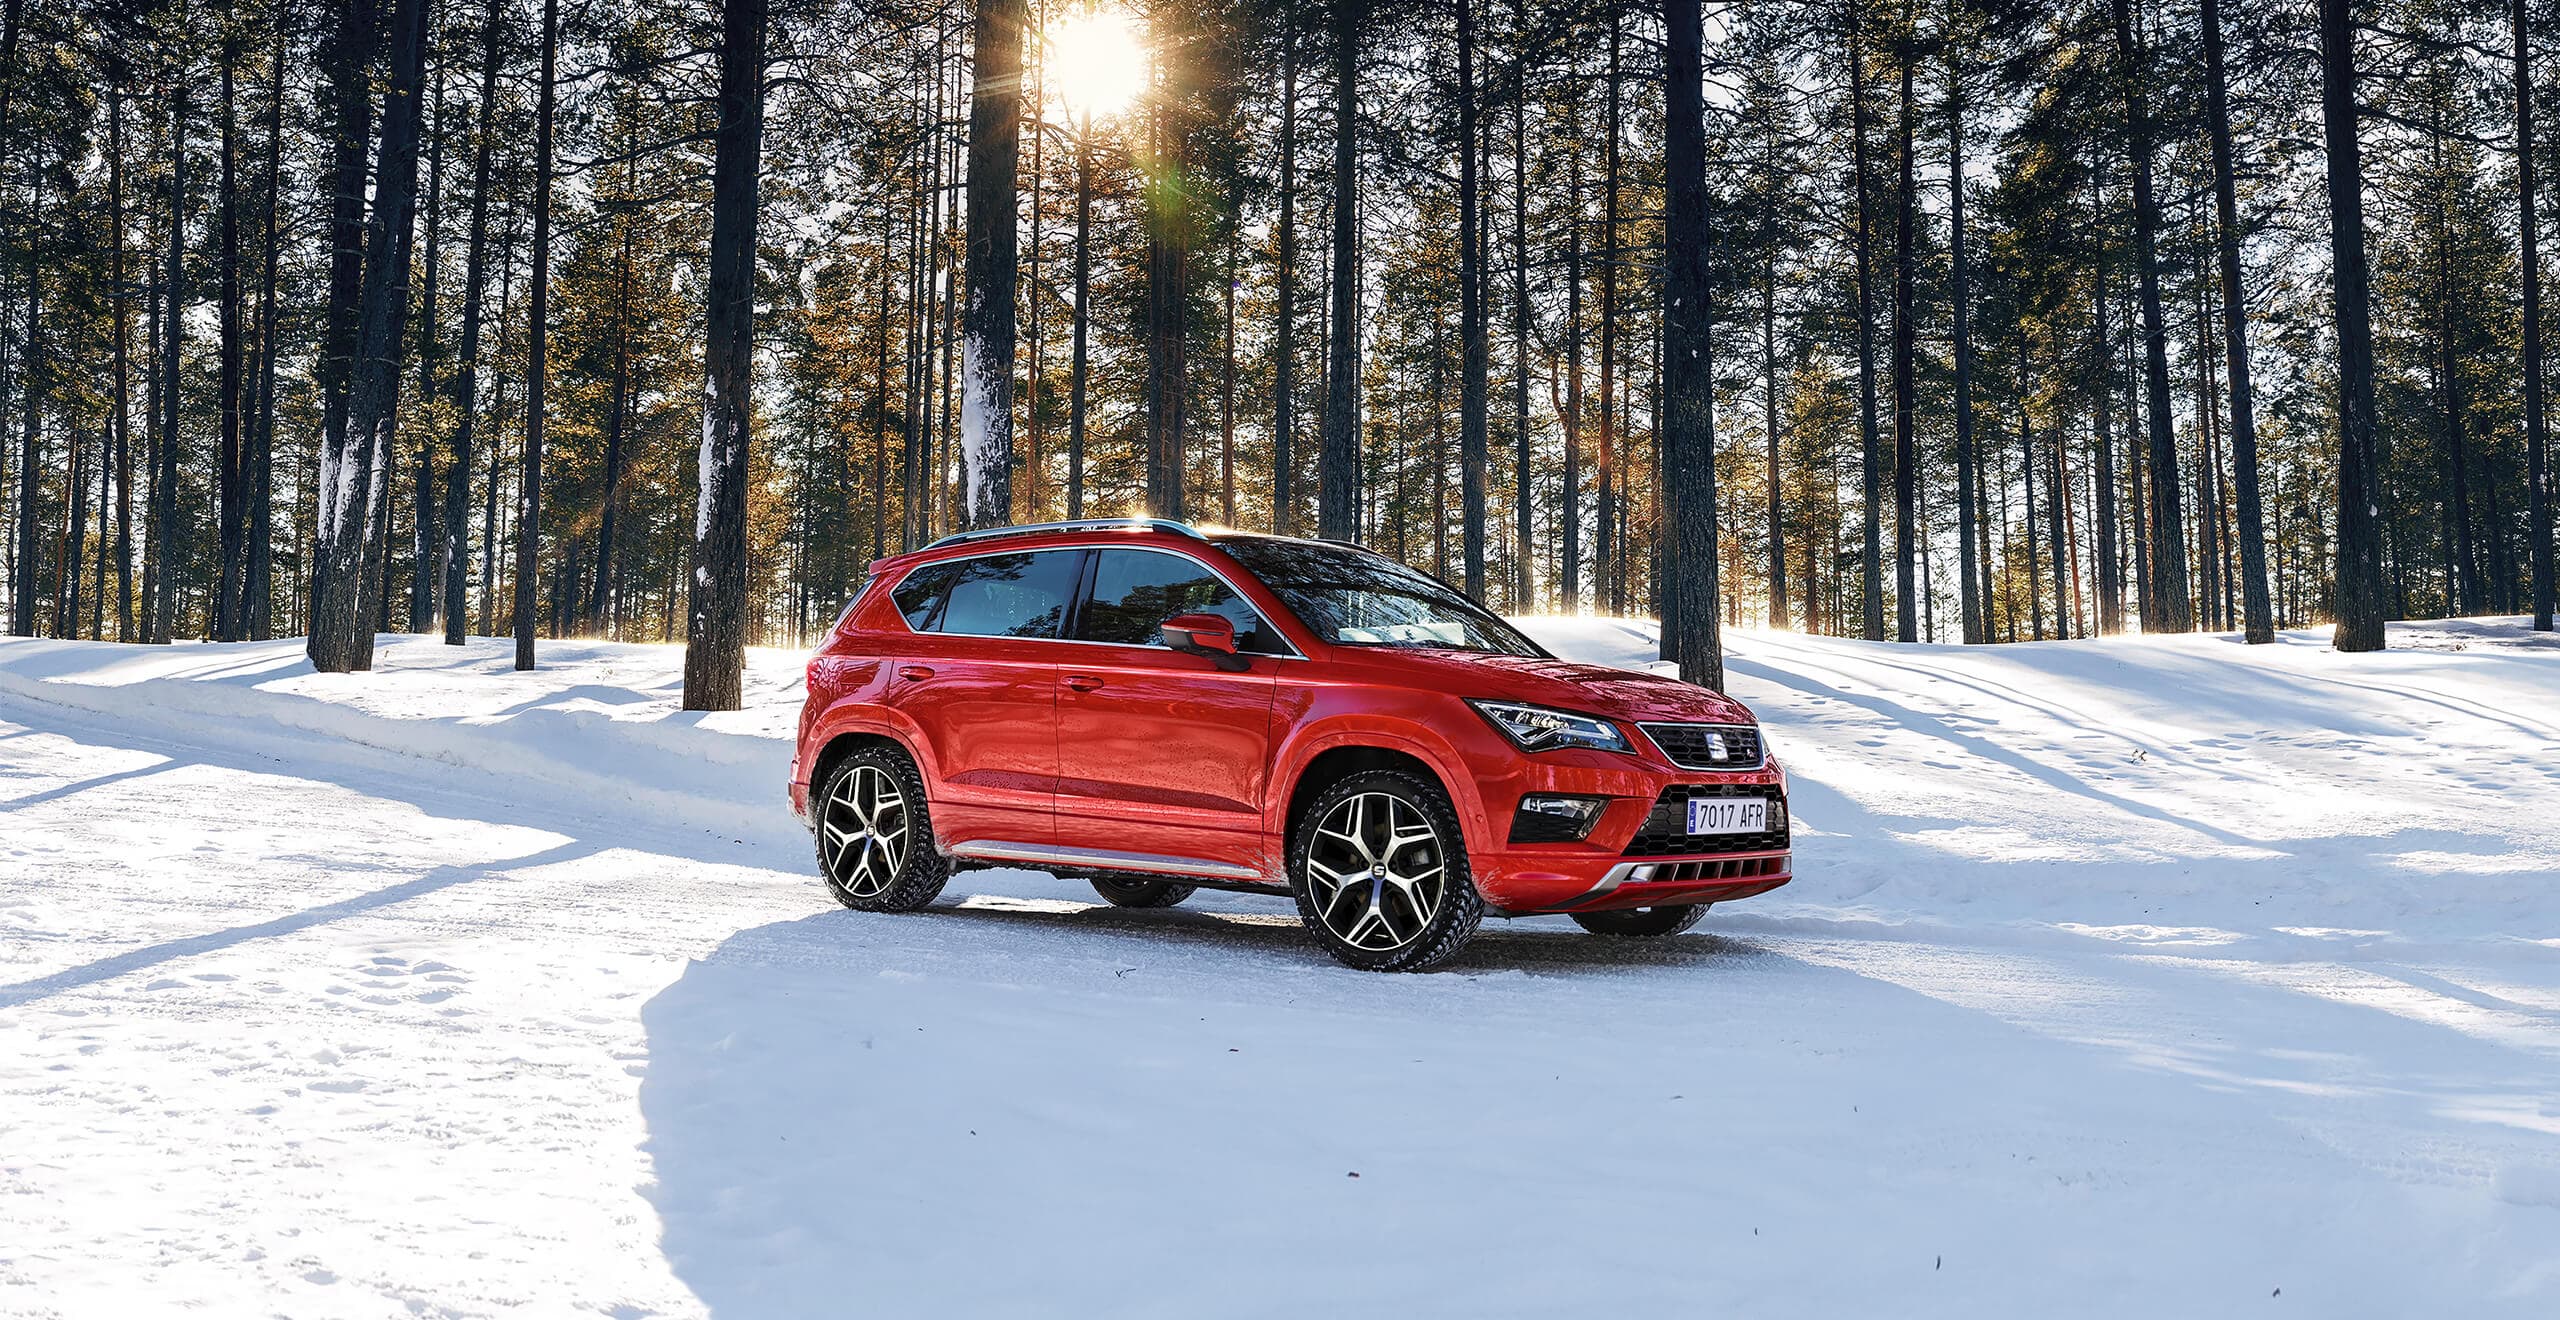 Red SEAT Ateca SUV car driving in snowy woods in front of tall trees